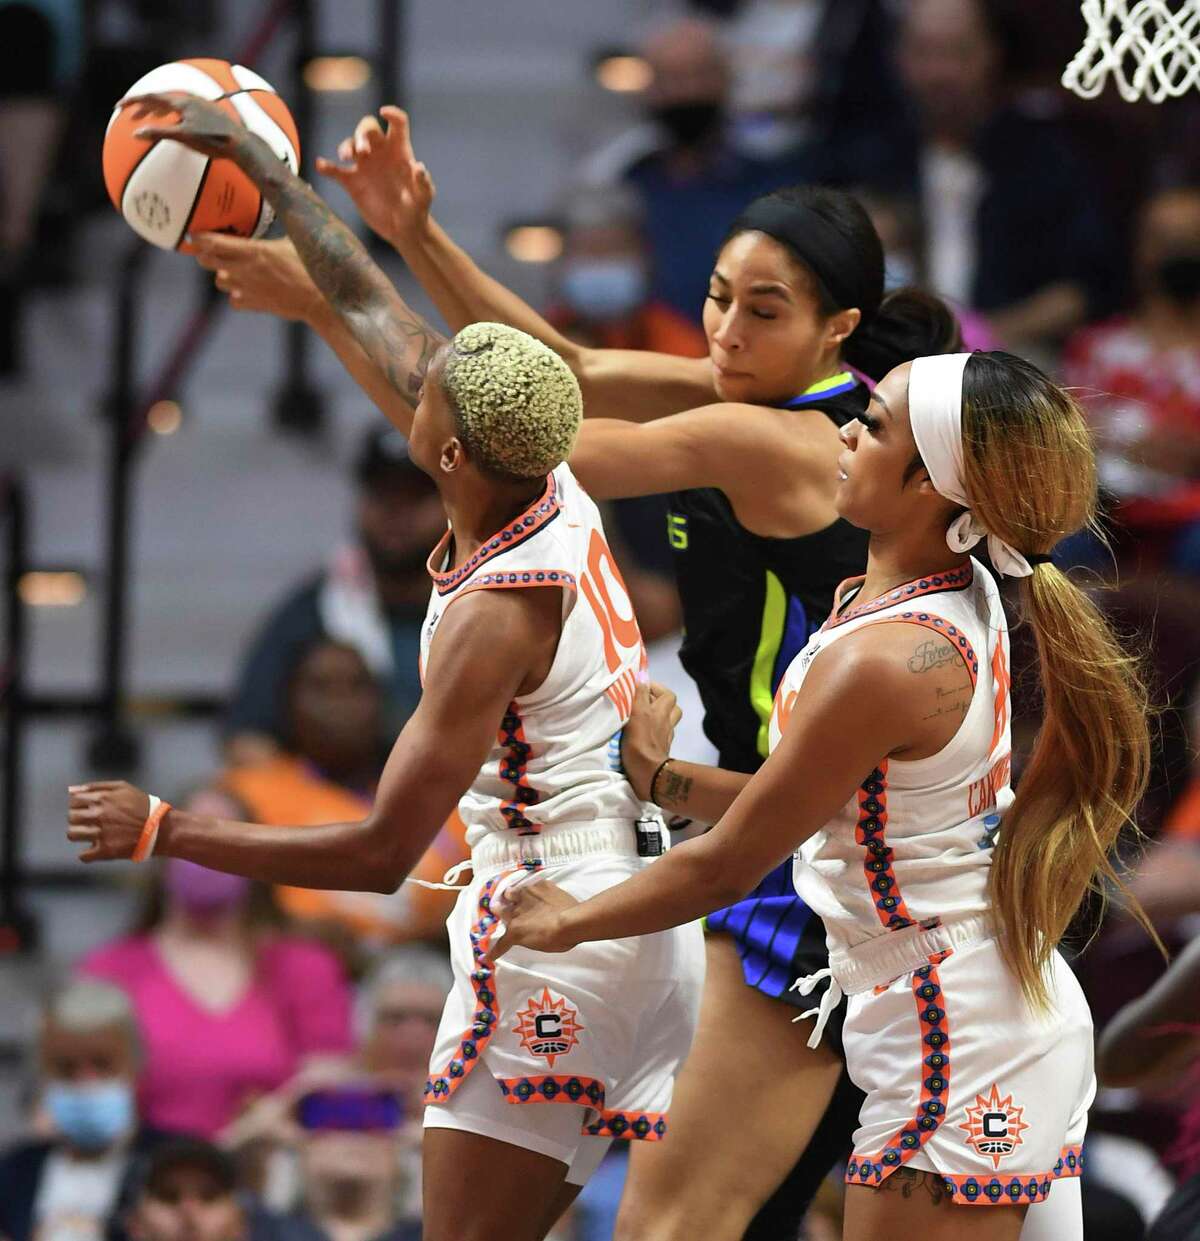 Connecticut Sun guard Courtney Williams (10) and forward DiJonai Carrington, right, battle against Dallas Wings forward Kayla Thornton, center, for a rebound during Game 1 of a WNBA basketball first-round playoff series Thursday, Aug. 18, 2022, in Uncasville, Conn. (Sean D. Elliot/The Day via AP)